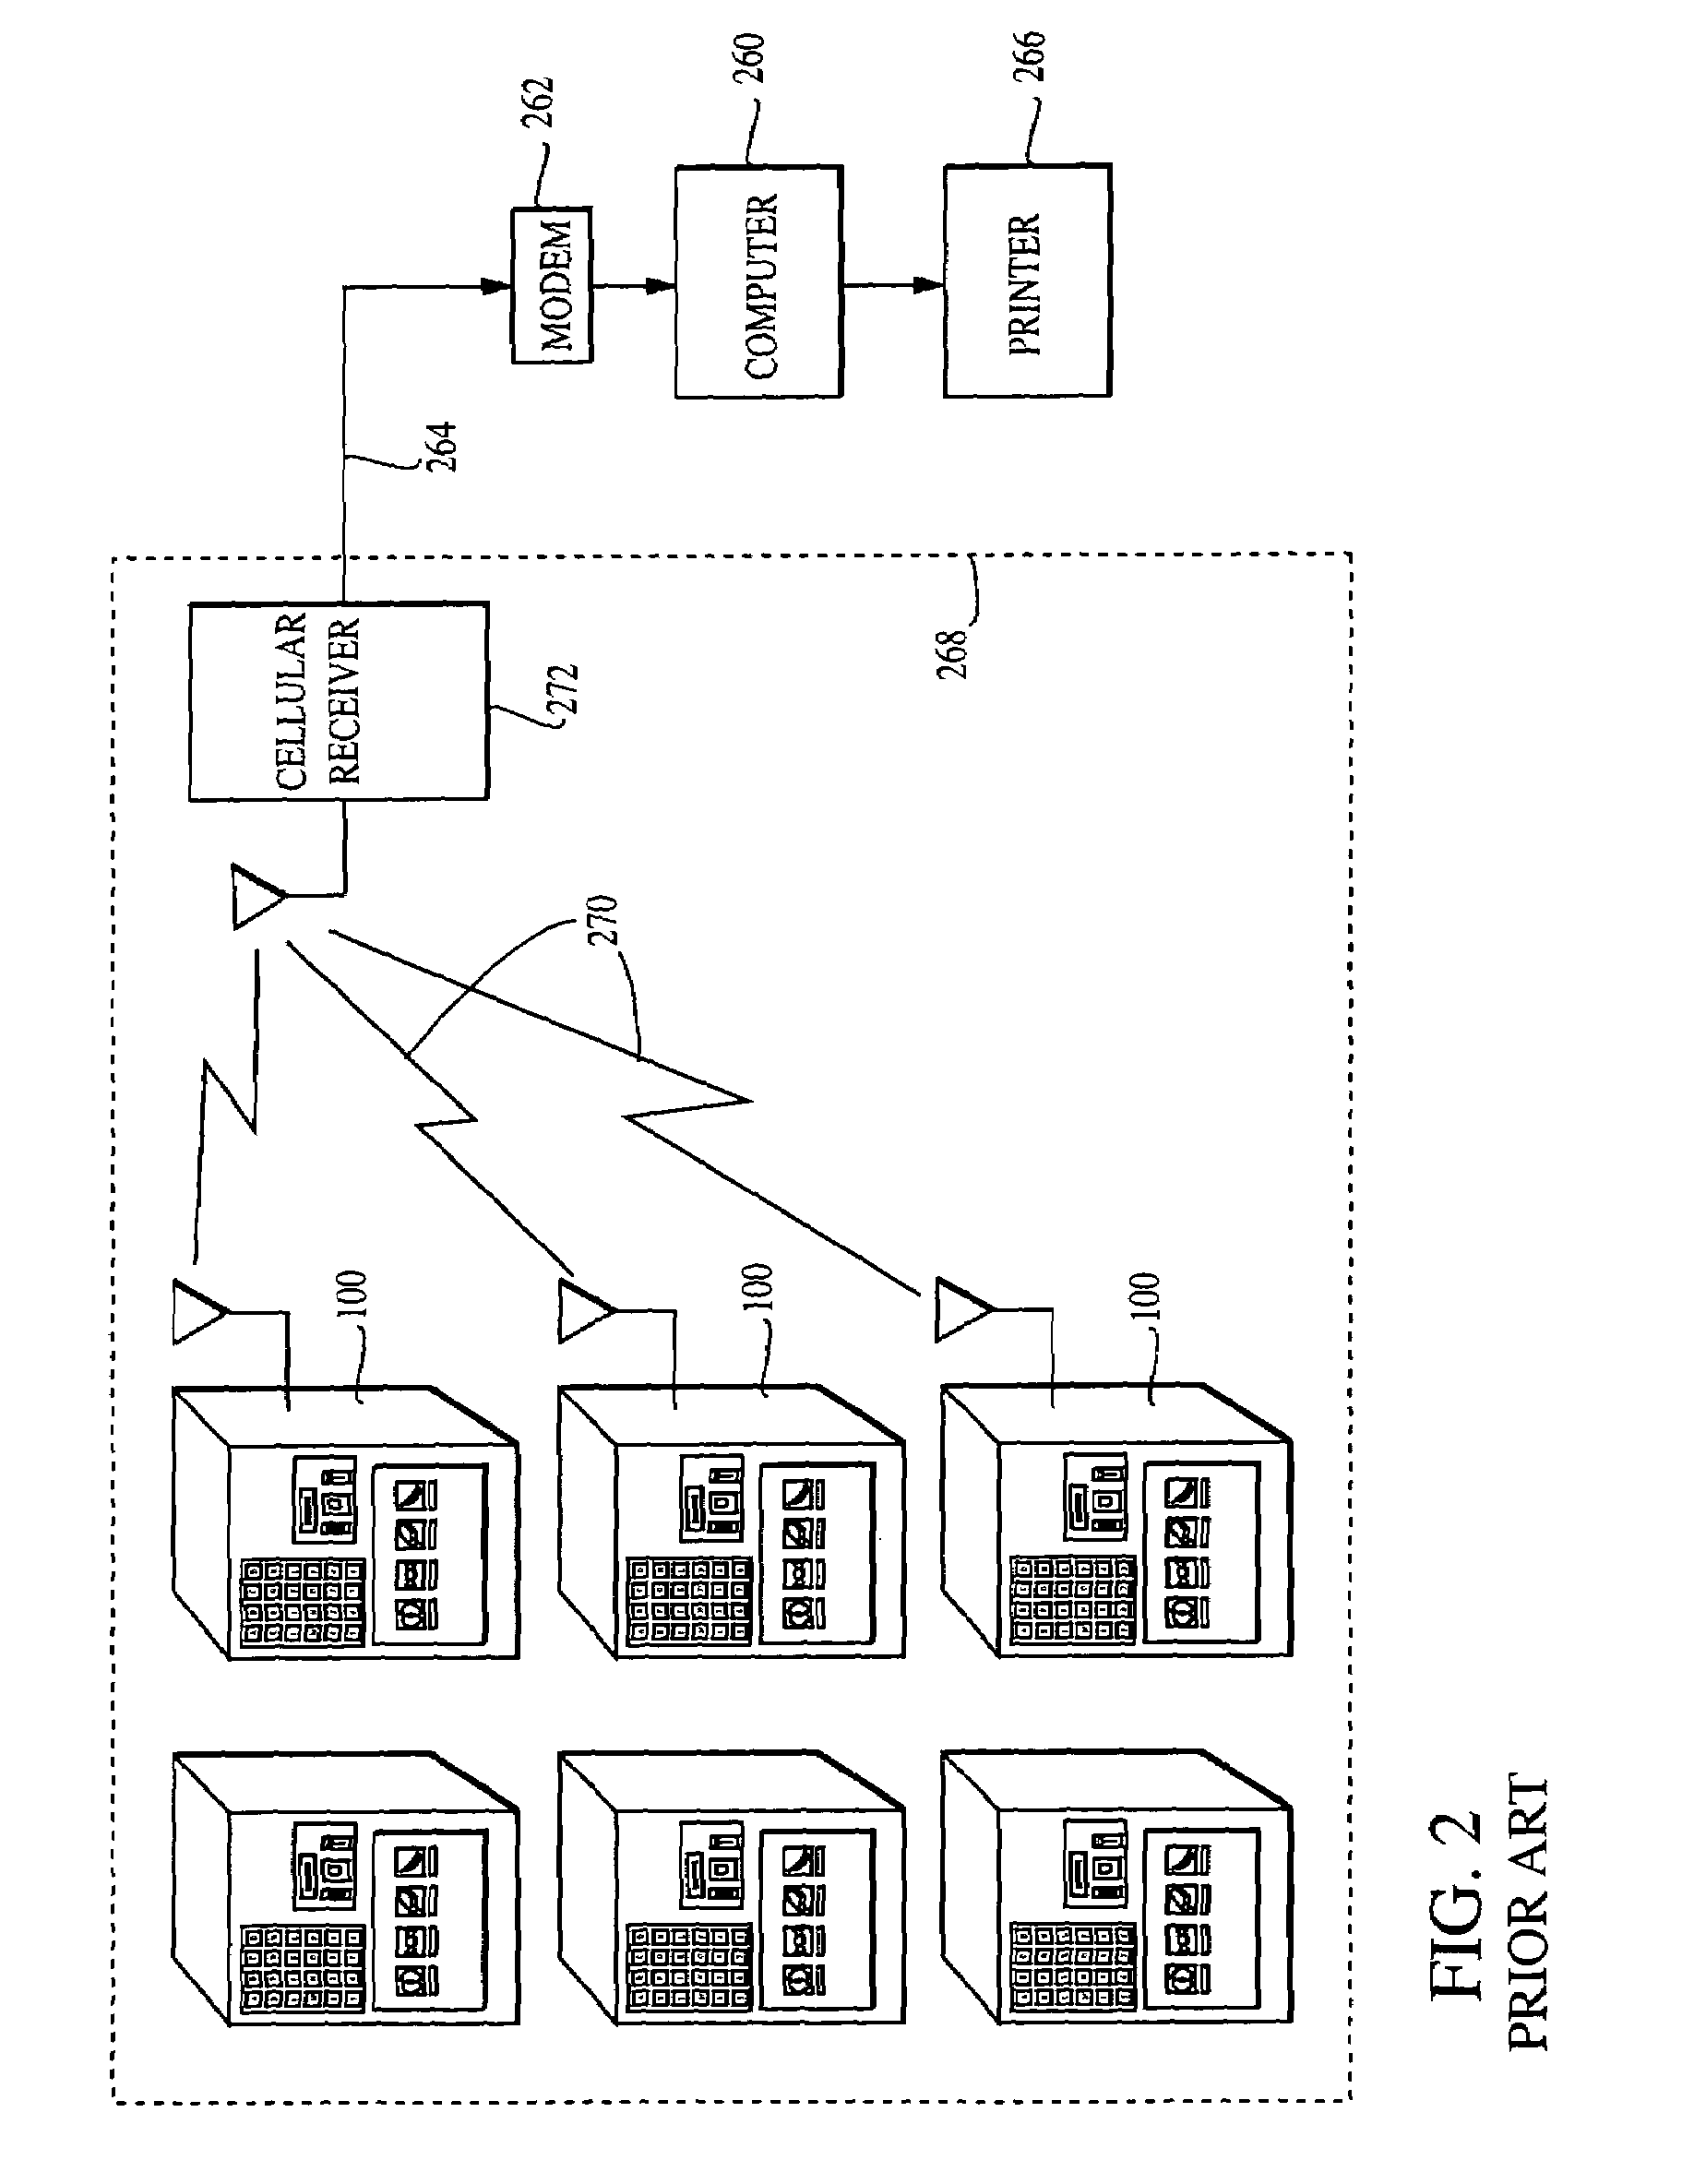 System and method of aggregating data from a plurality of data generating machines